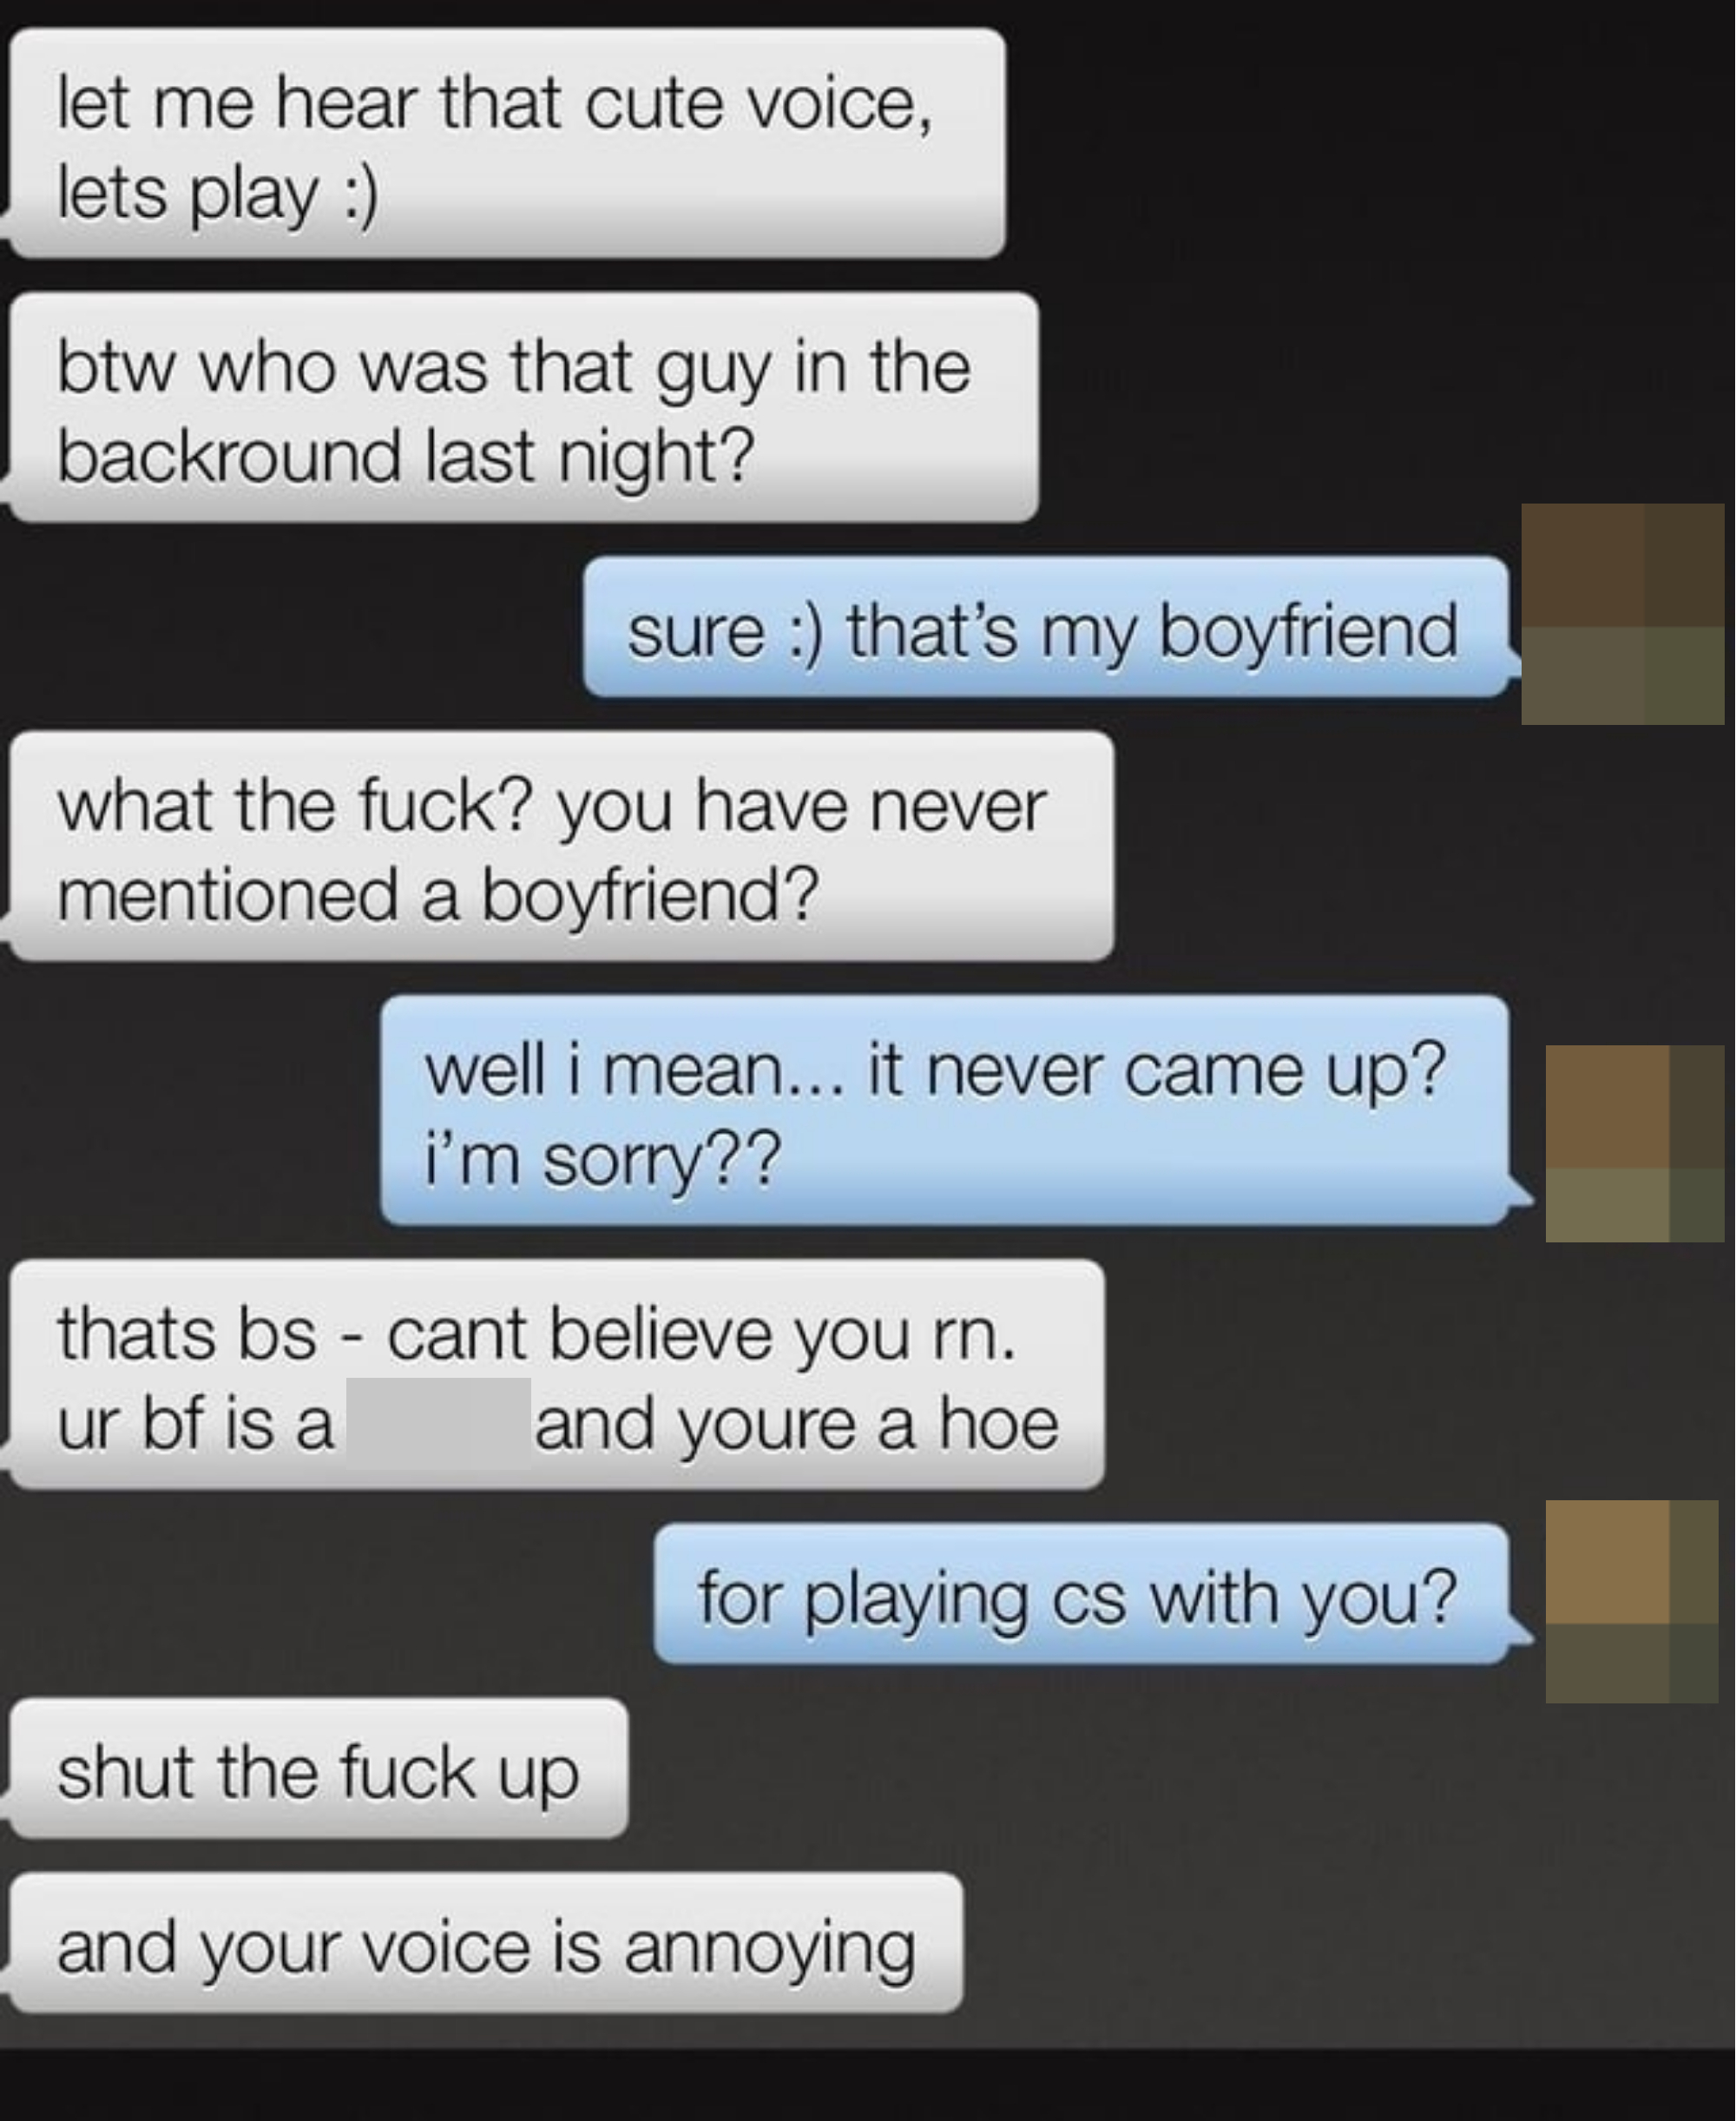 text telling her to shut the fuck up and calling her a hoe after she says she was a boyfriend